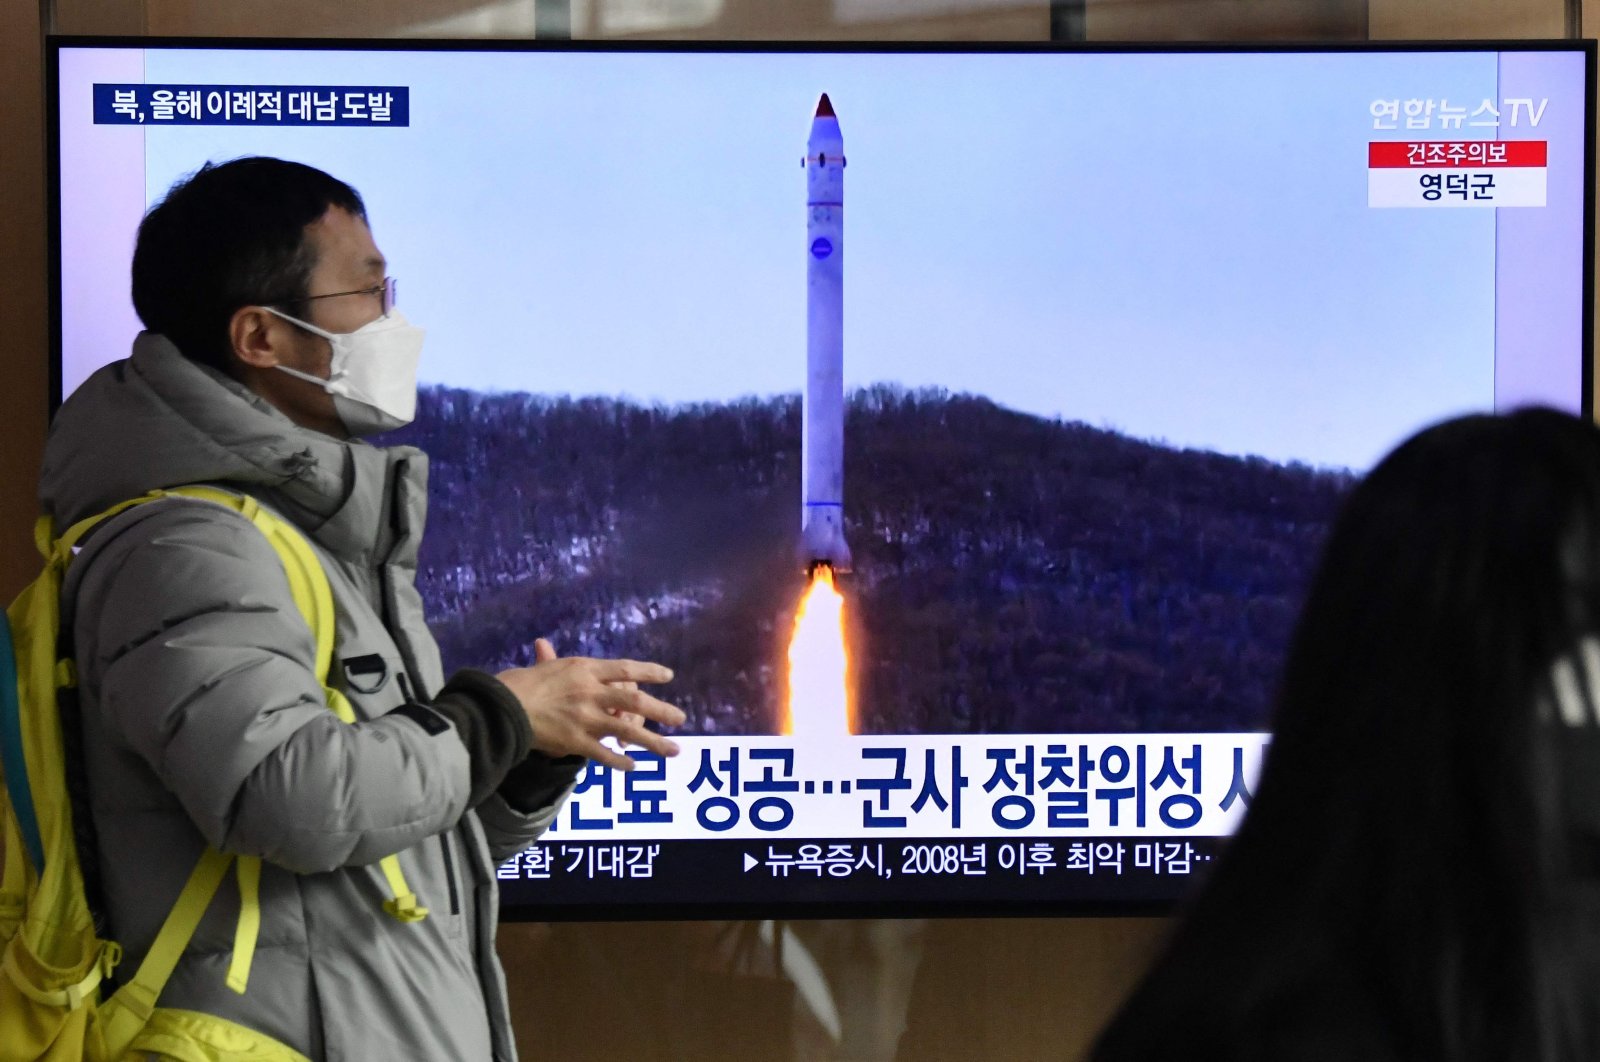 A man walks past a television screen showing a news broadcast with file footage of a North Korean missile test, at a railway station in Seoul on Dec. 31, 2022. (AFP Photo)